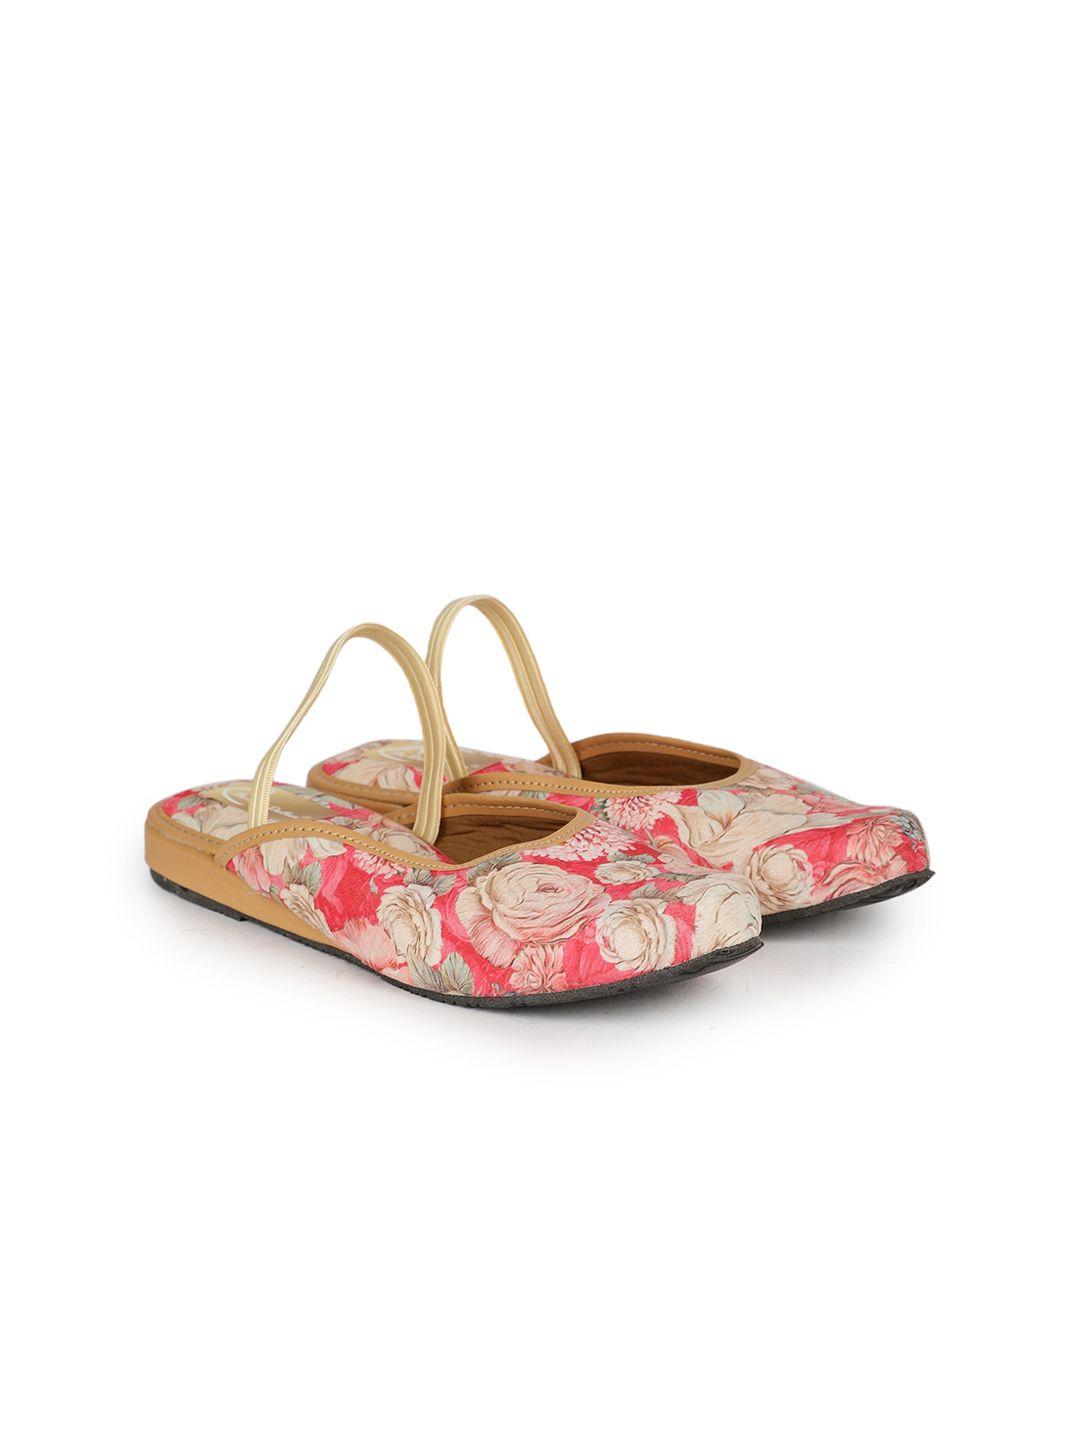 the desi dulhan printed ethnic mules with backstrap